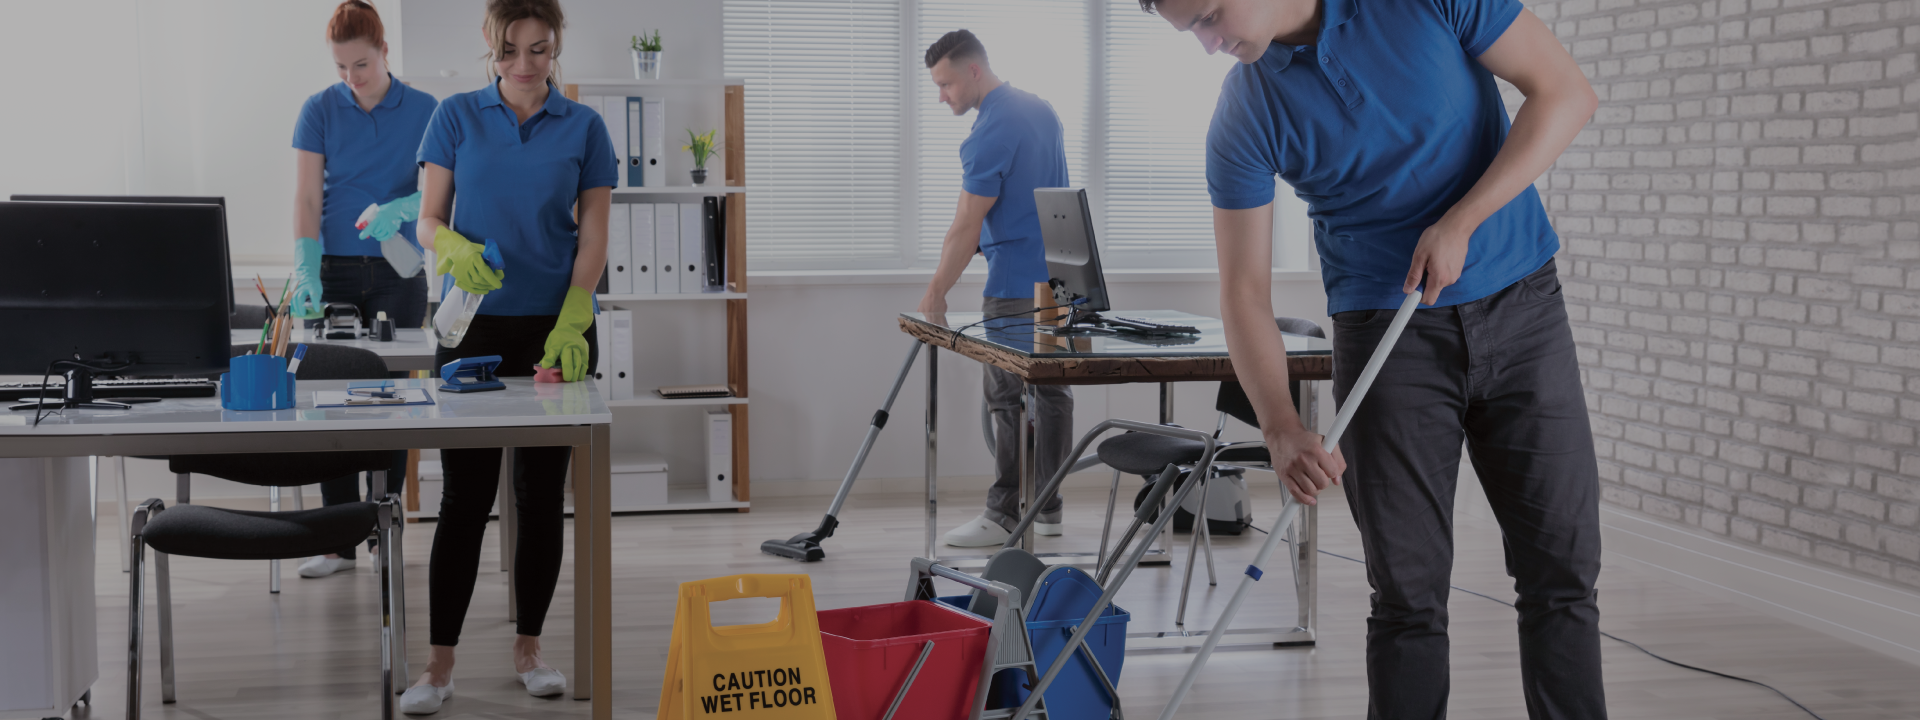 A FULL SERVICE JANITORIAL COMPANY